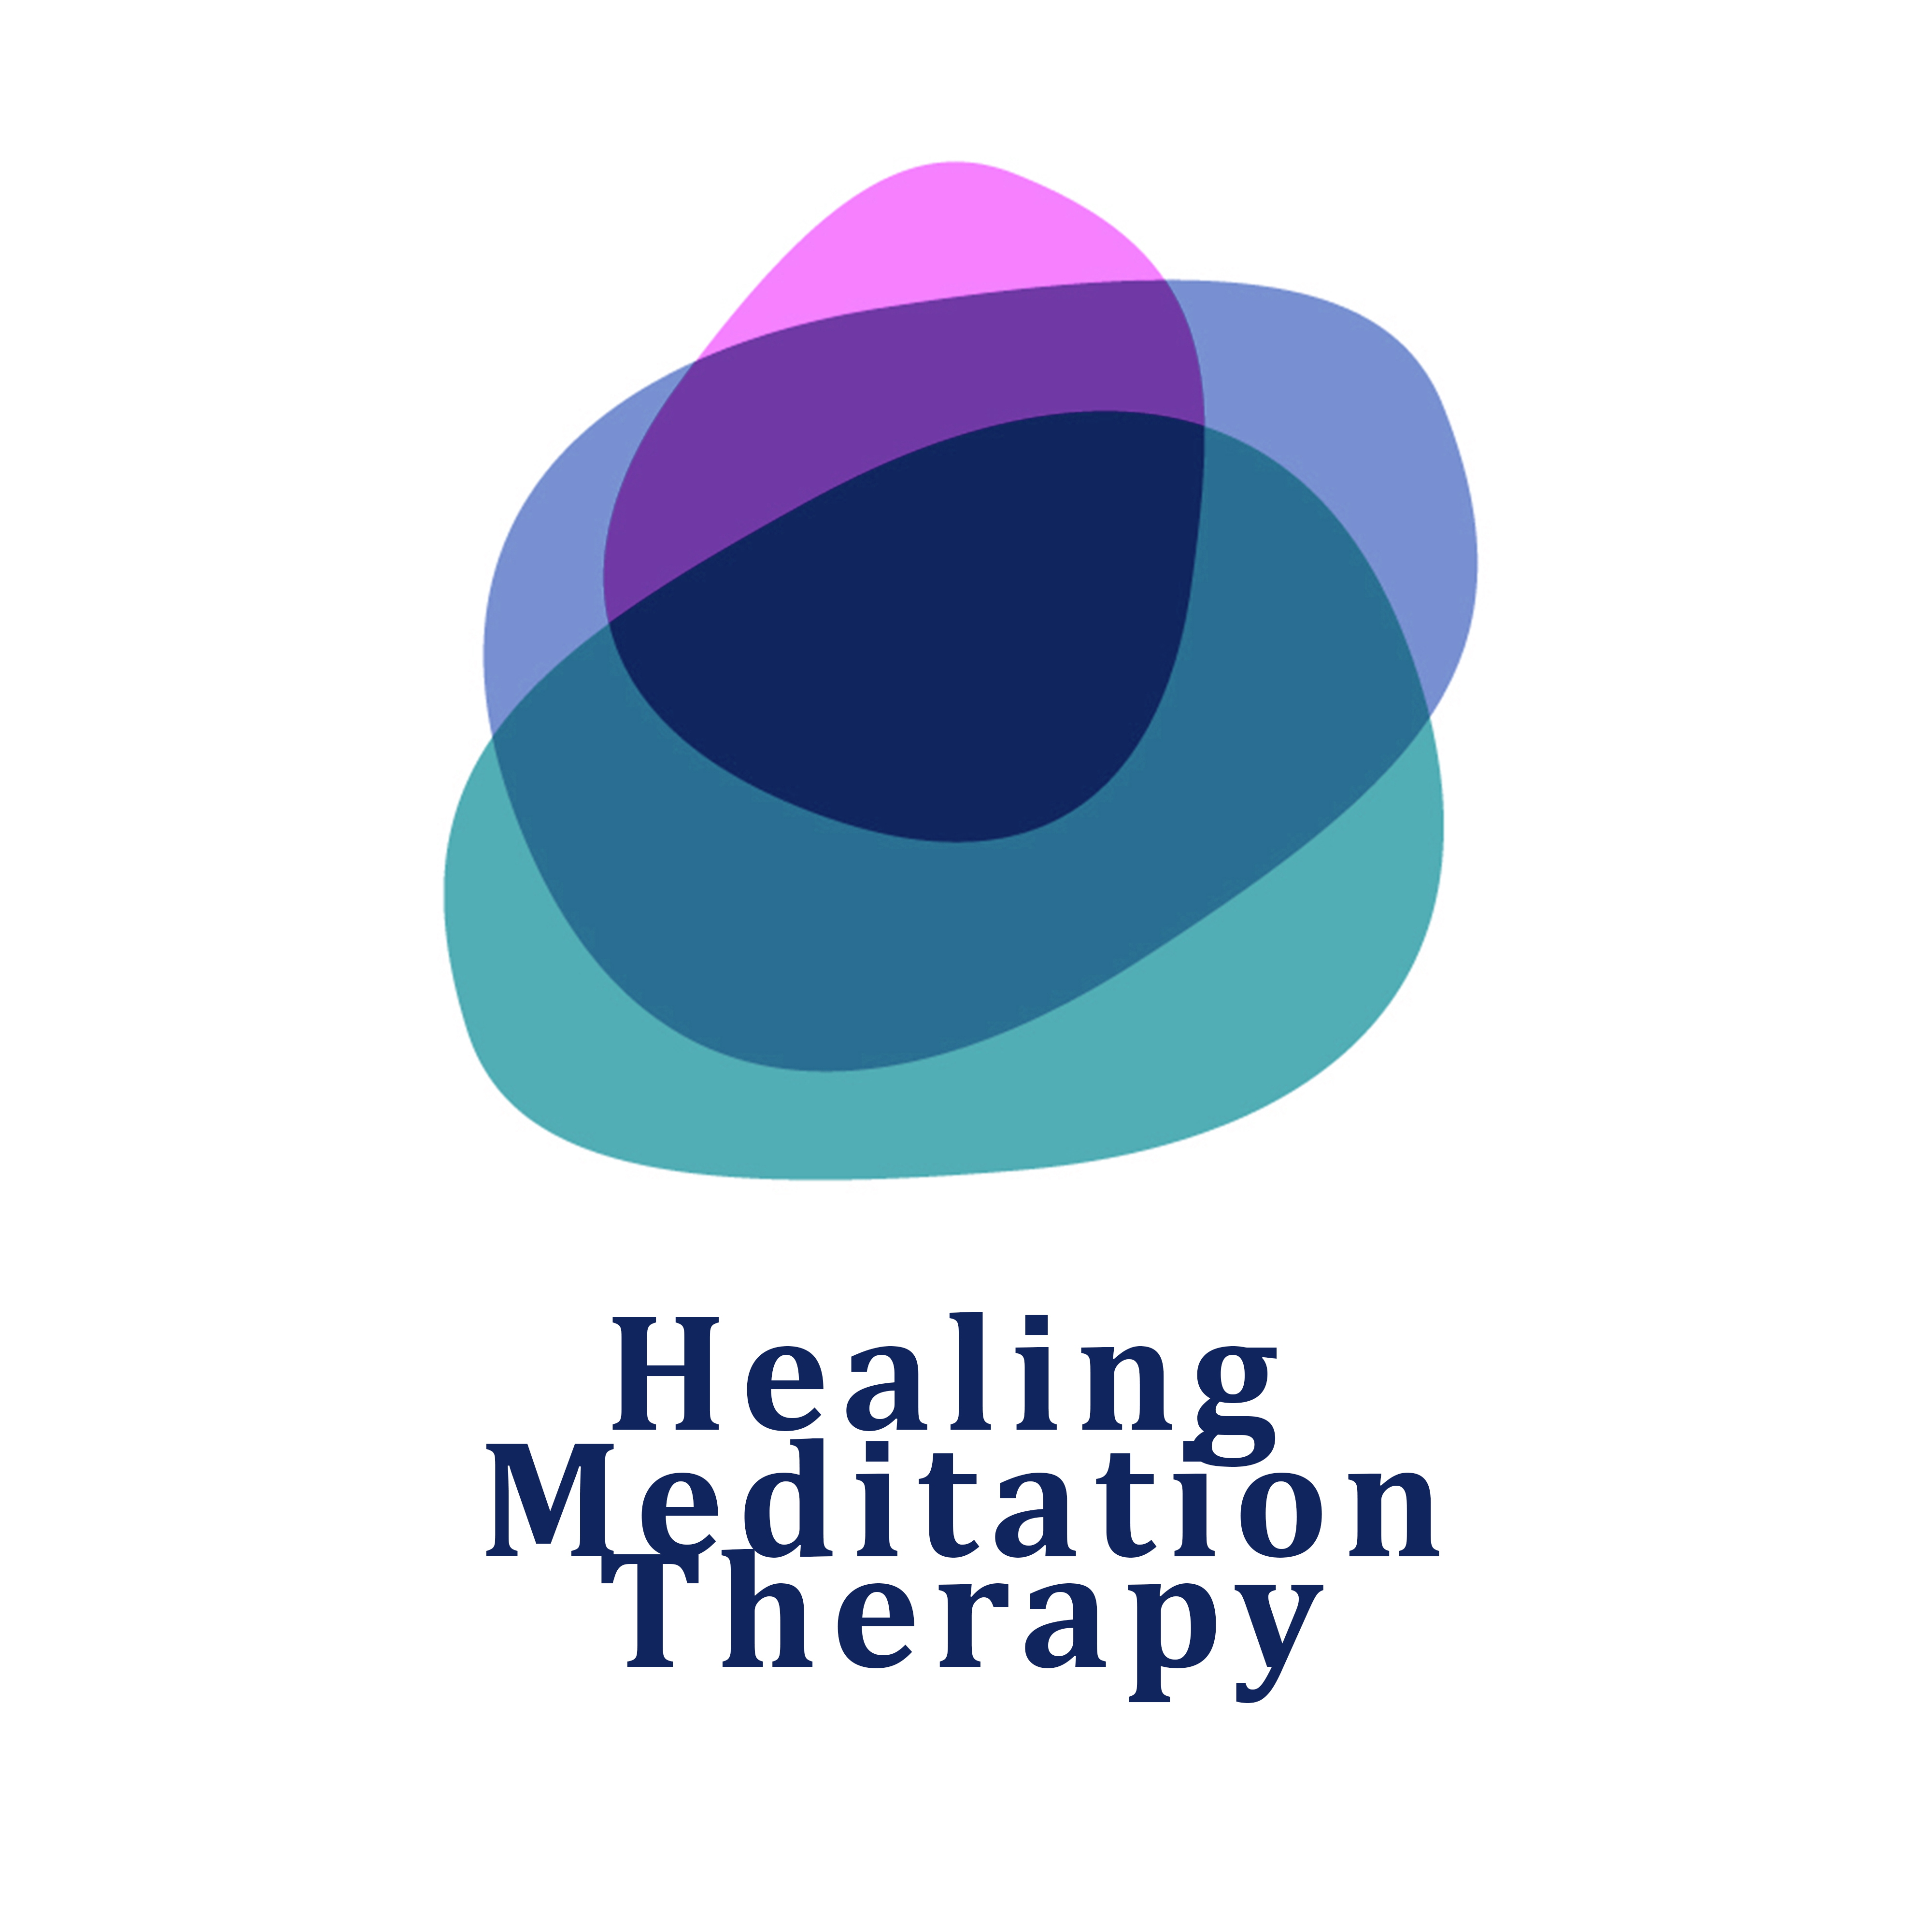 Healing Meditation Therapy